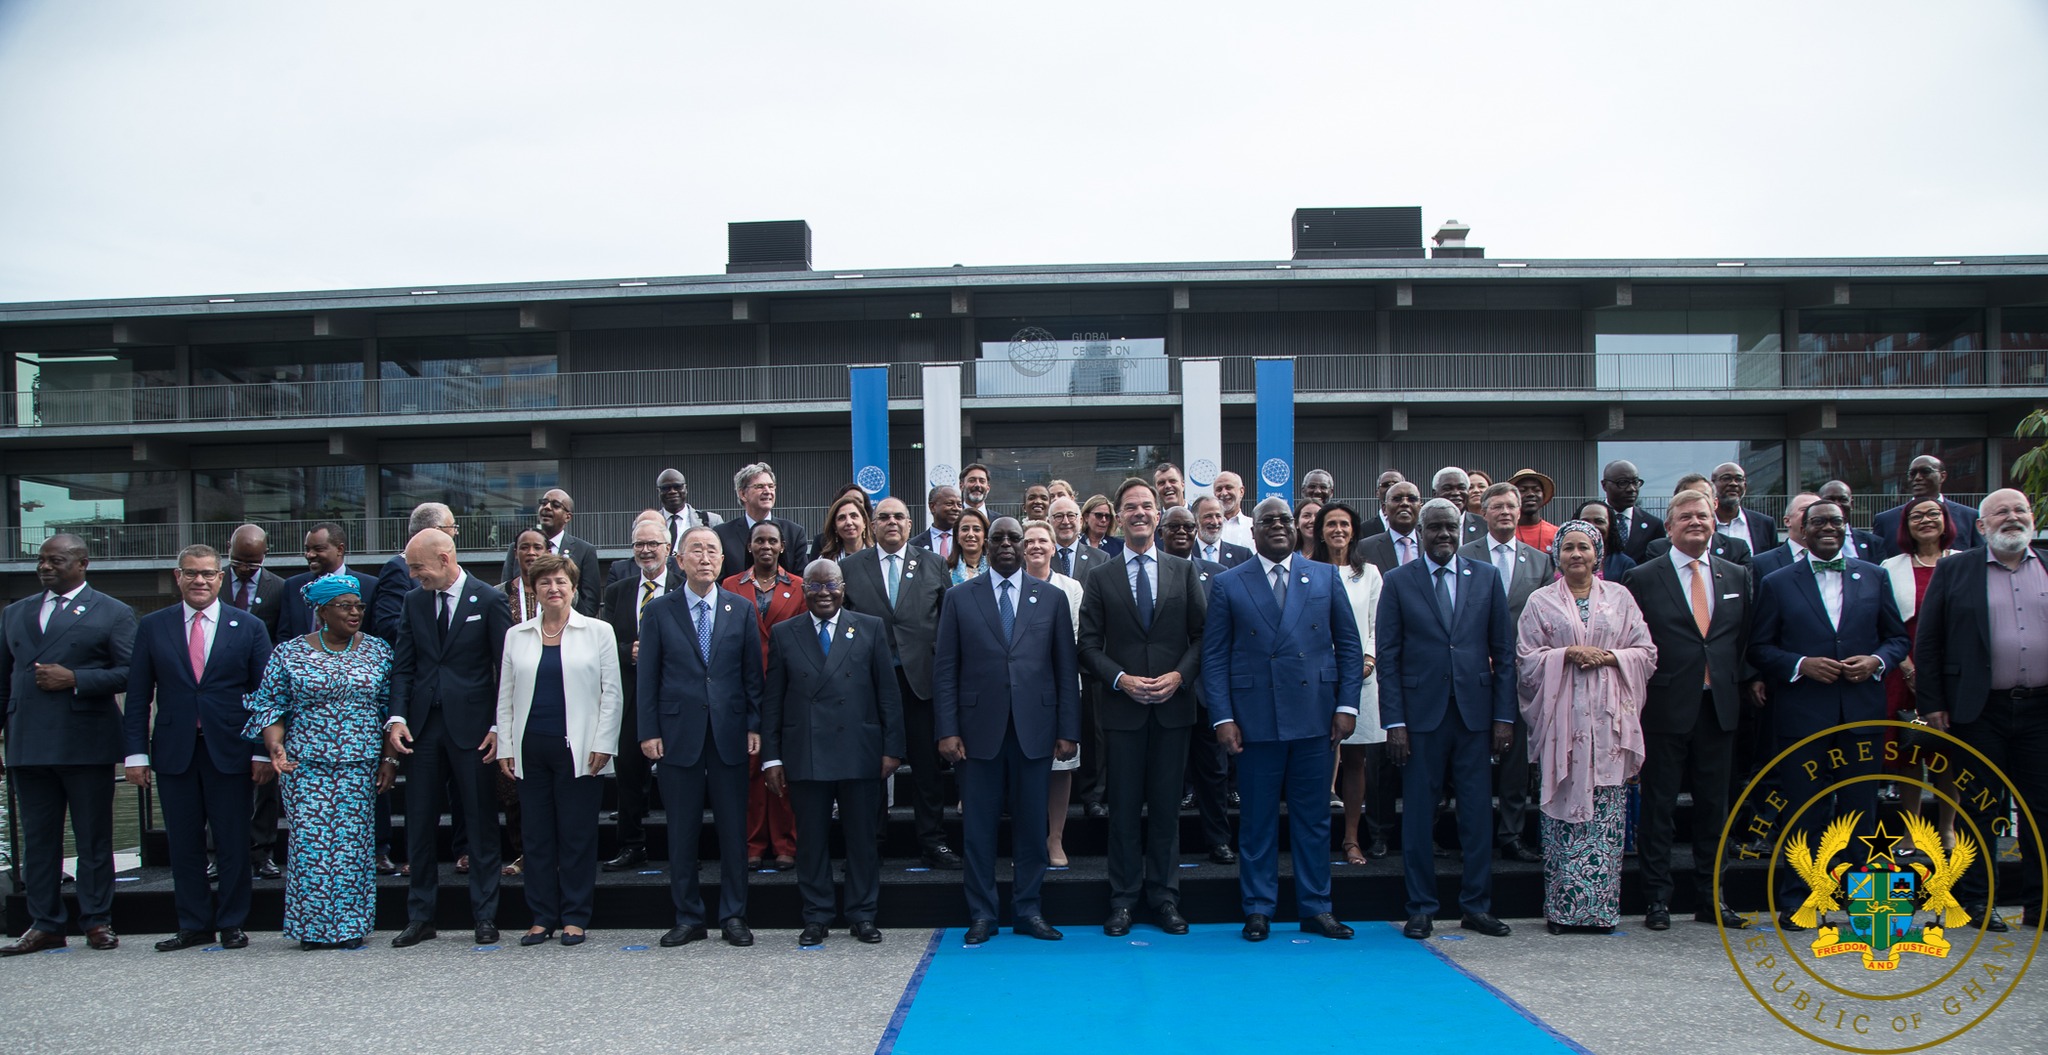 President Akufo-Addo (3rd from left, front row) and other leaders and offi cials who attended the Climate Adaptation Summit in Rotterdan, The Netherlands